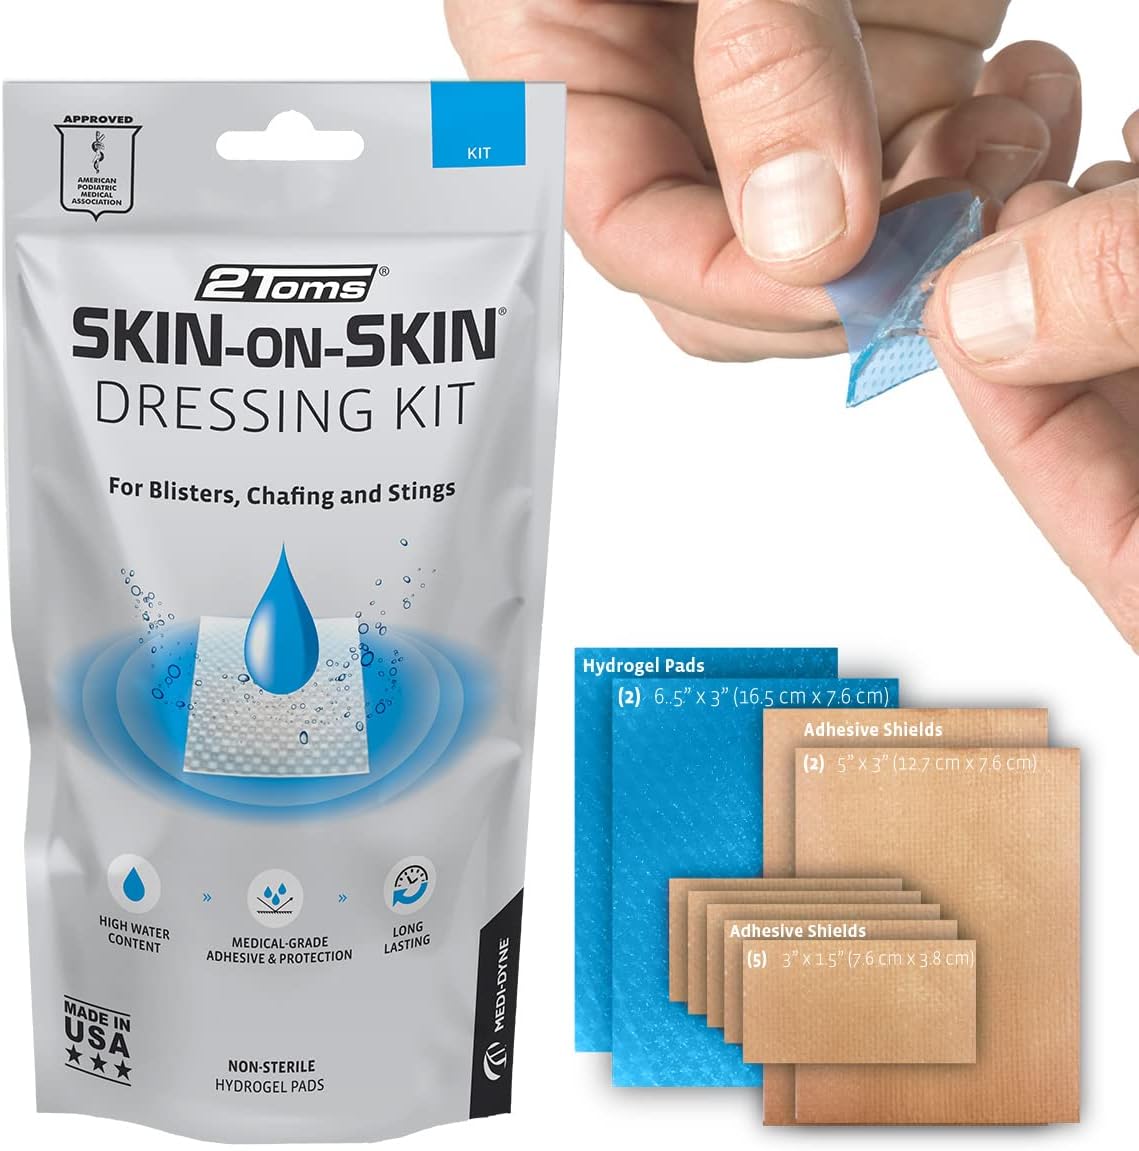 2Toms Skin-On-Skin Hydrogel Circles for Blisters, Chafing, Stings, Irritations, and Skin Pain Relief, 48 3-inch circles